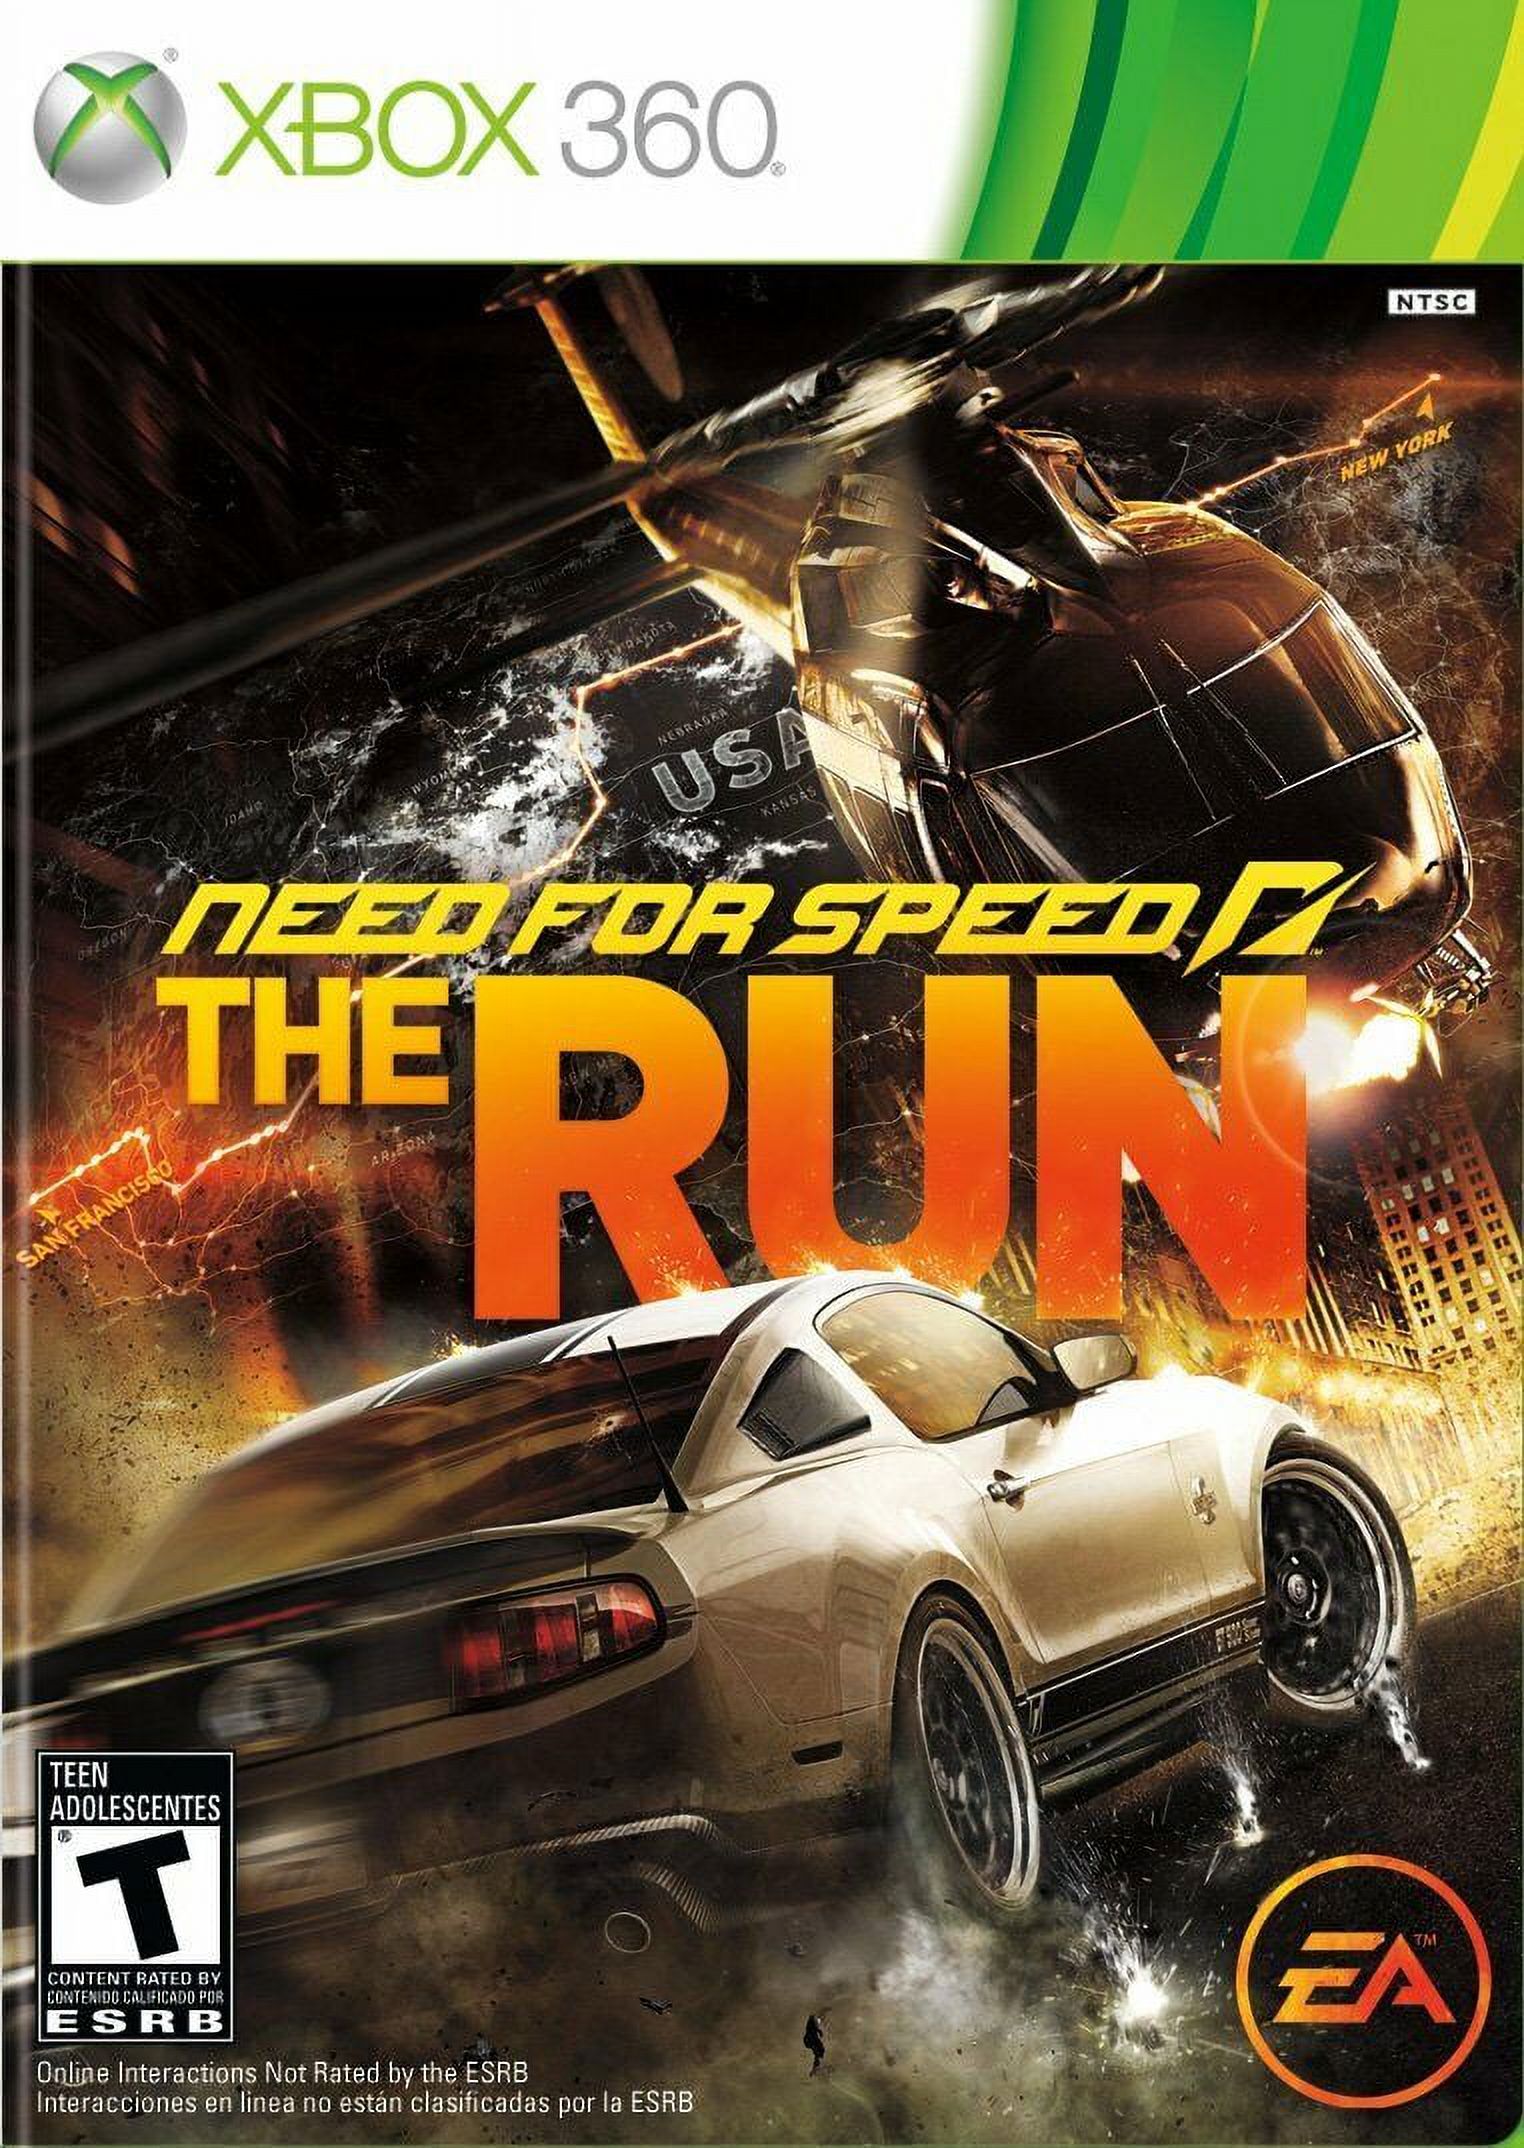 Brand New Need for Speed The Run Xbox 360 EA Sports Cars Racing - image 1 of 9